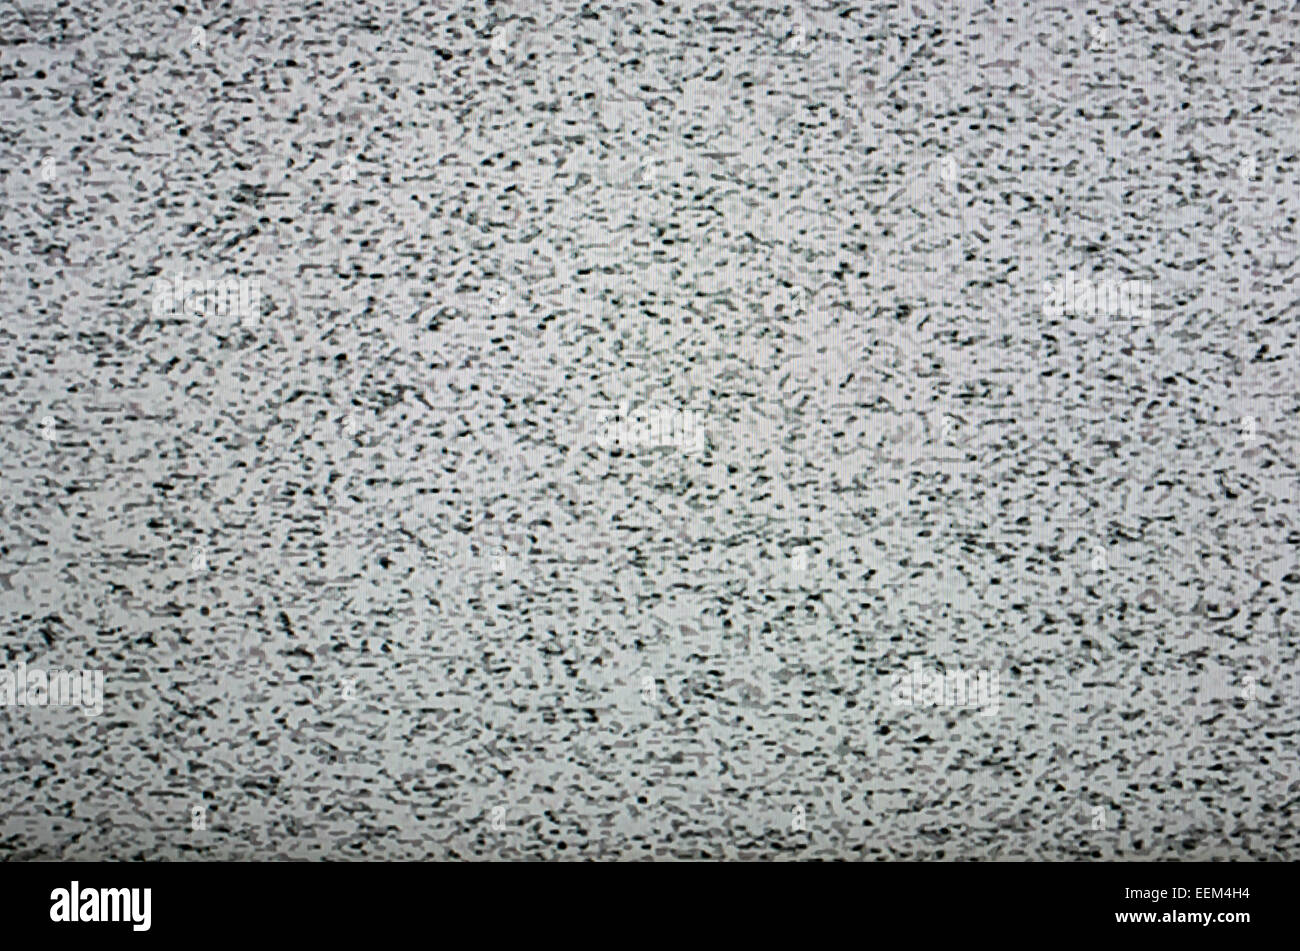 Television static due to lack of transmission signal on digital liquid crystals display, background Stock Photo